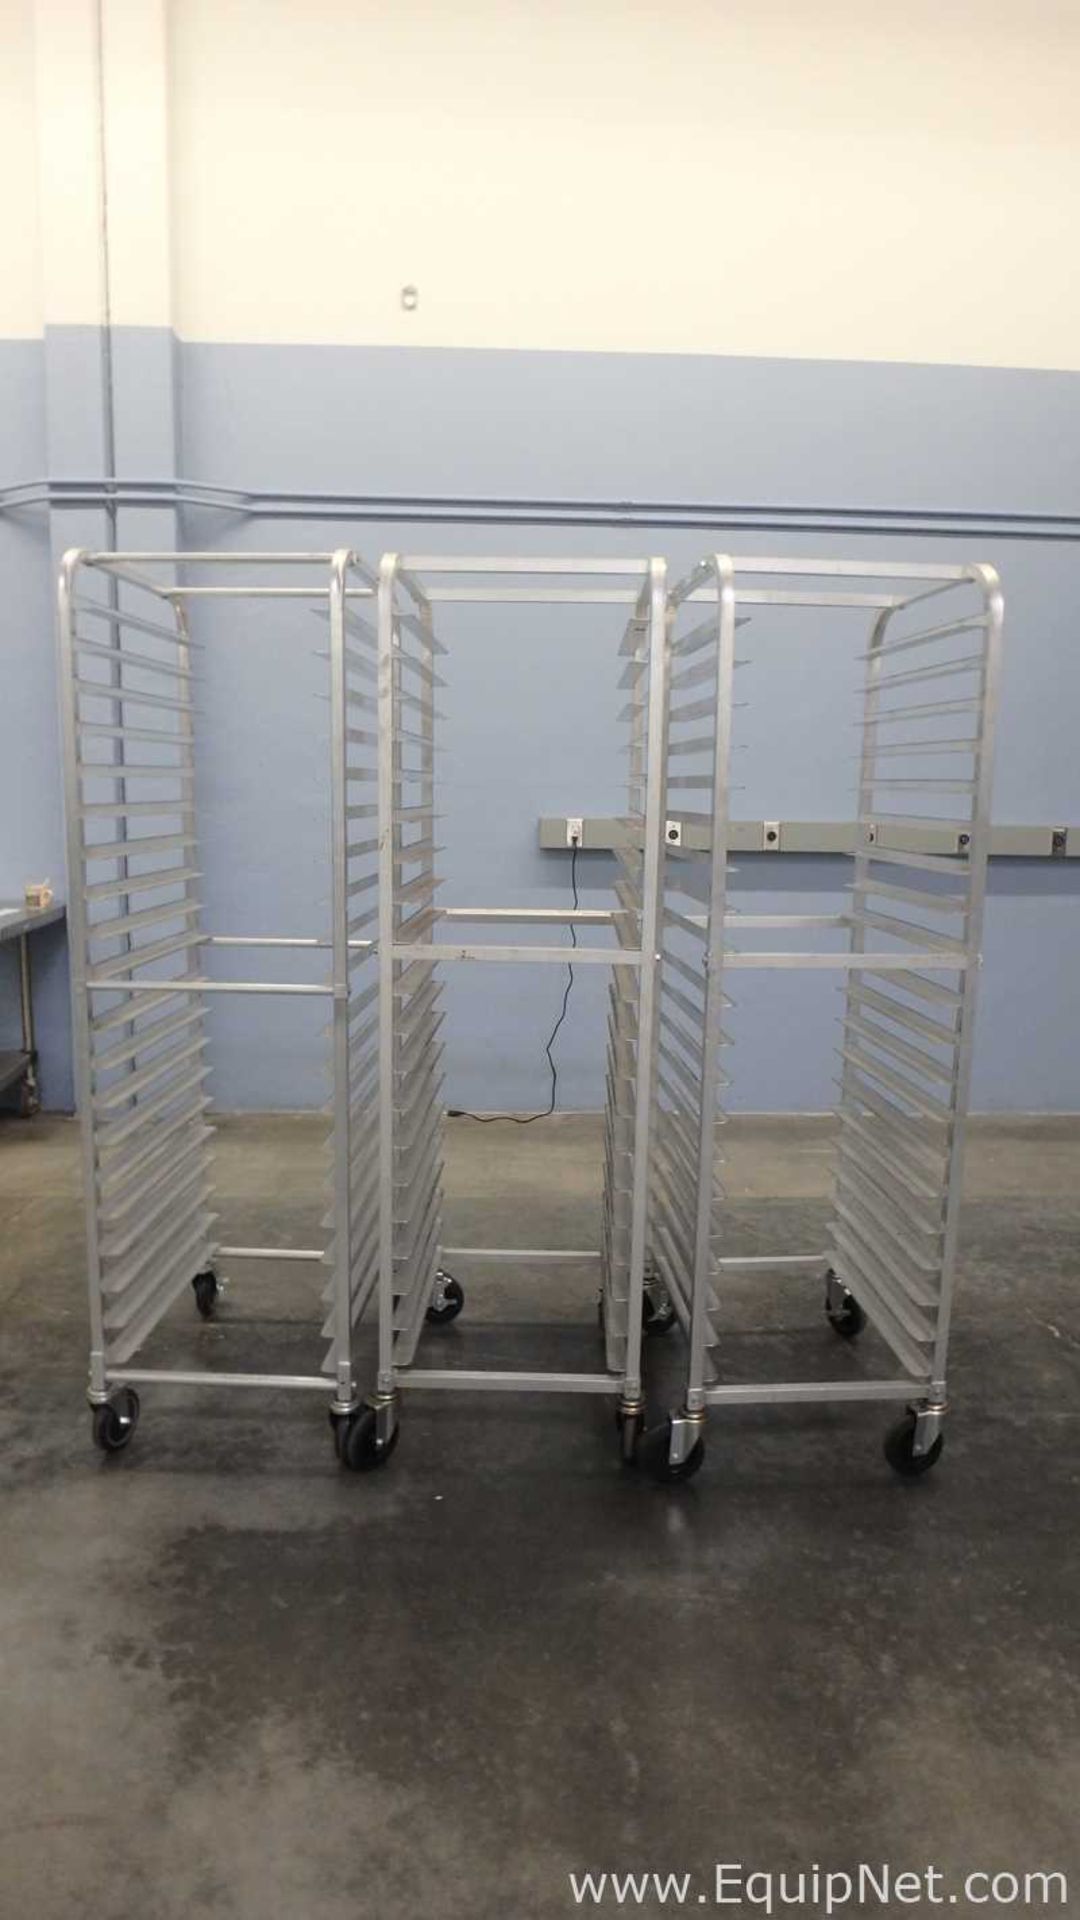 Lot of 3 Allstrong Mobile Pan Rack Full Height Open Sides with Slides for 20 18inx26in Pans - Image 2 of 8